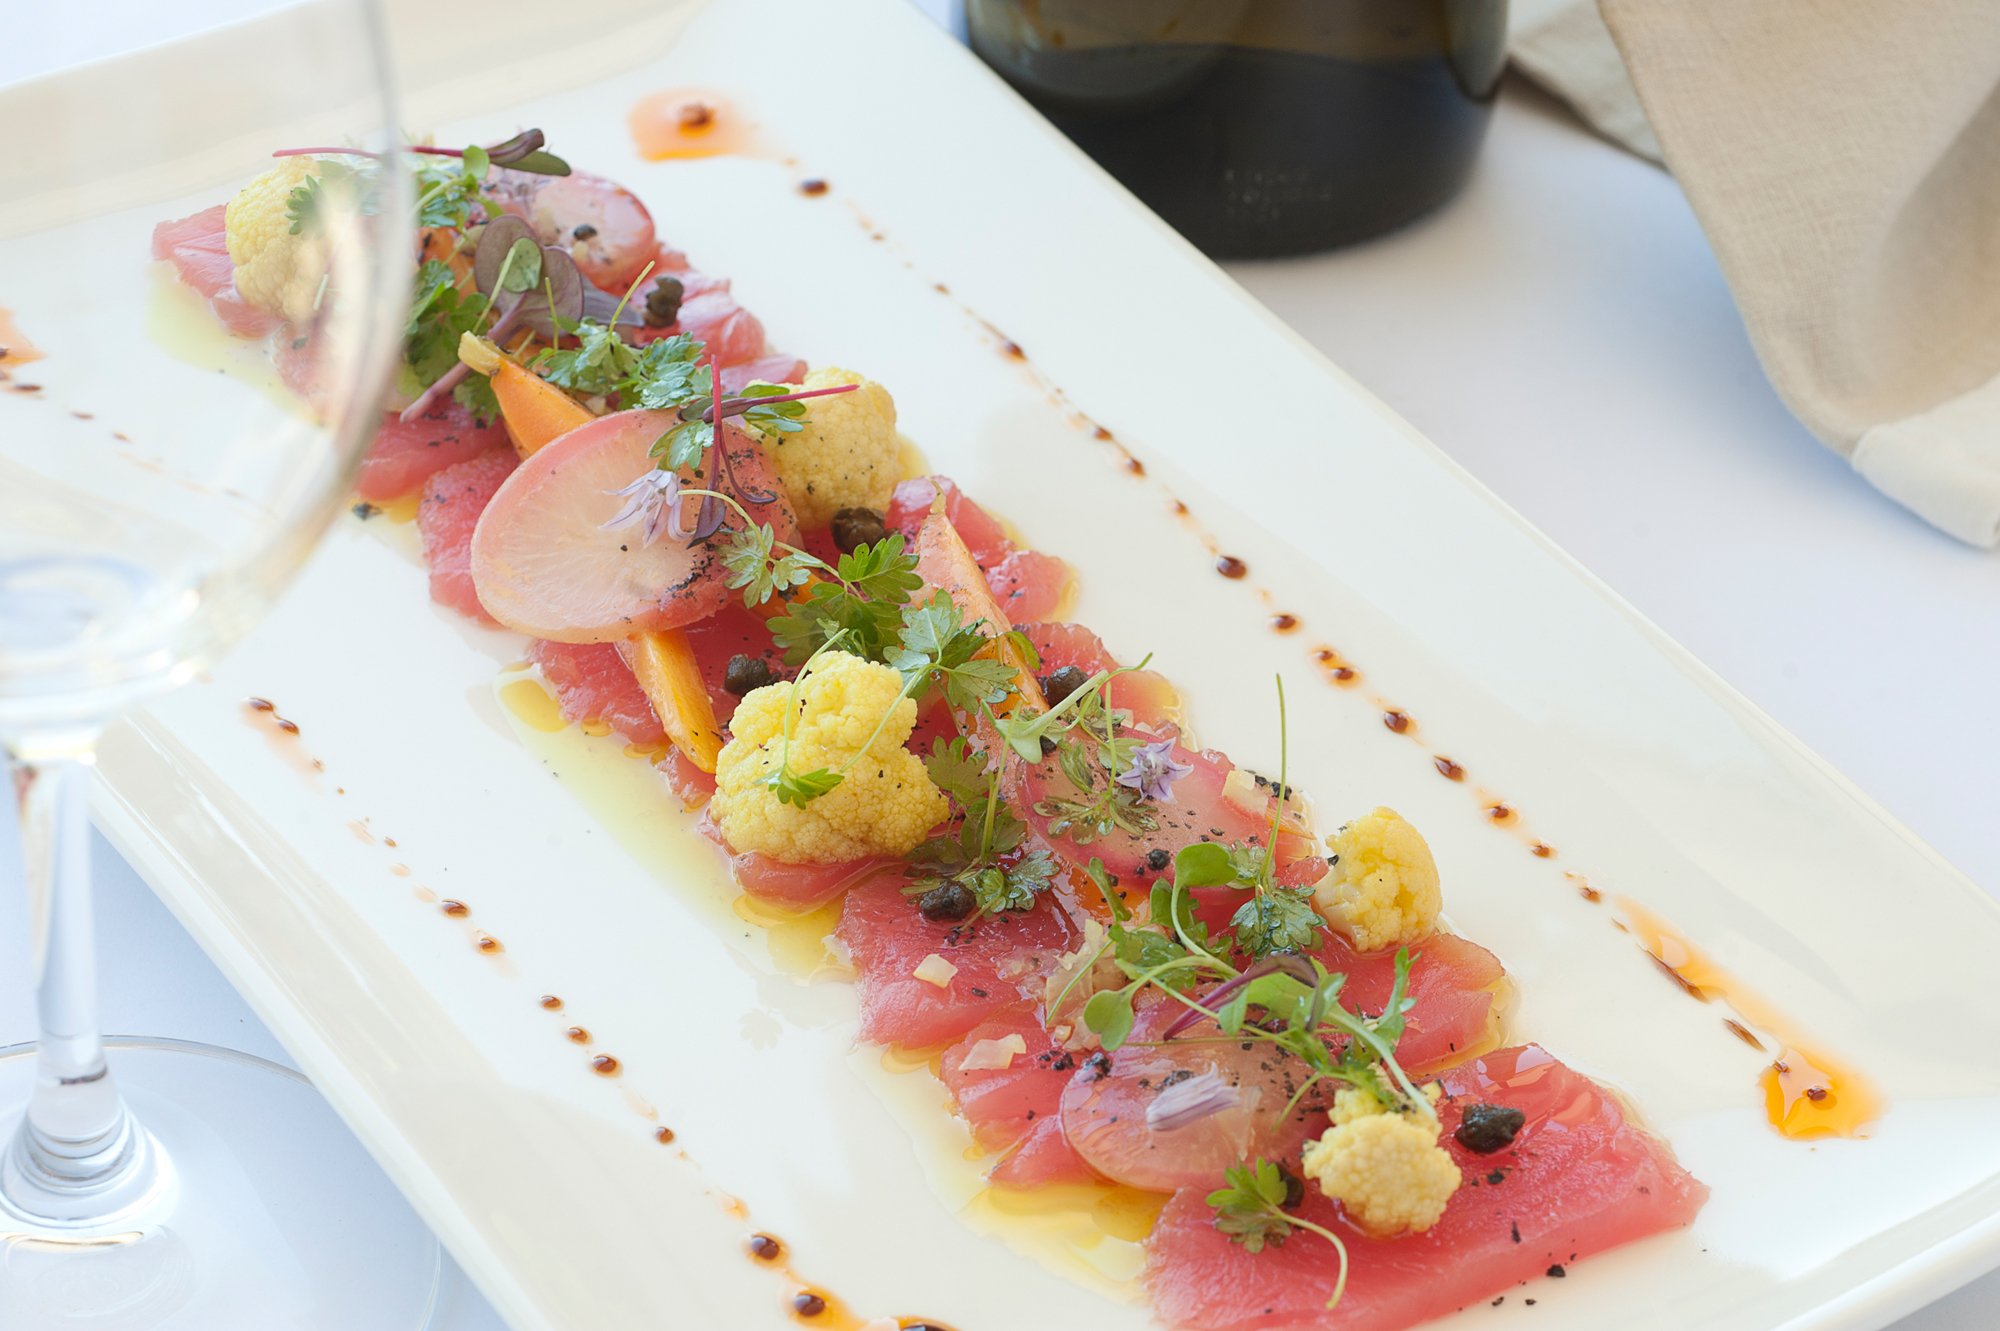 Carpaccio of Kingfish with Picalilli, capers and white balsamic dressing